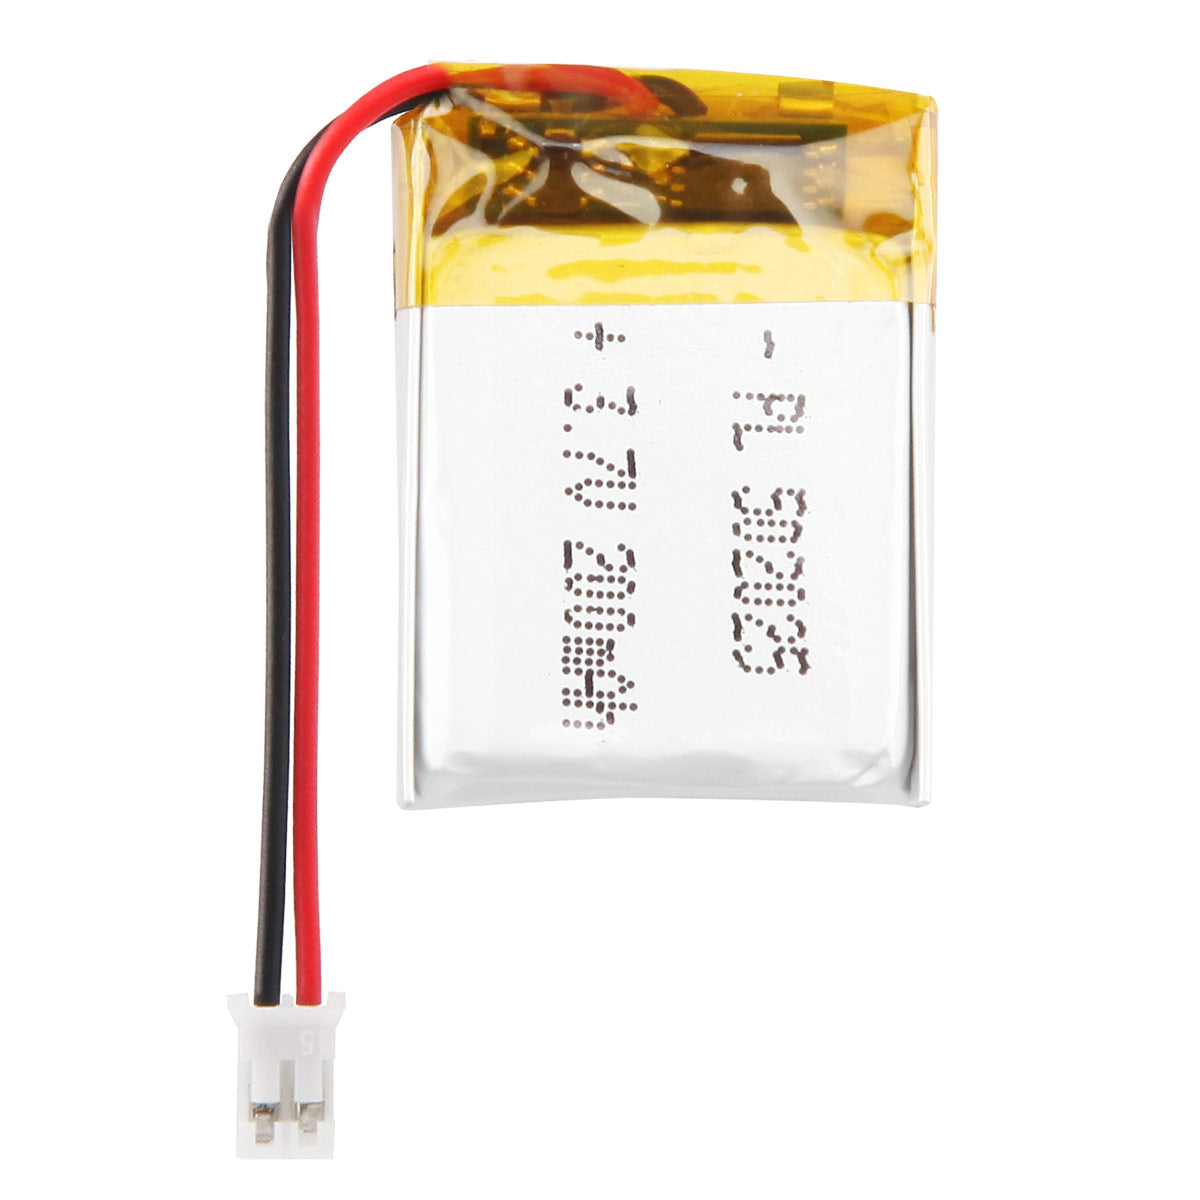 YDL 3.7V 200mAh 502025 Rechargeable Lithium Polymer Battery Length 27mm